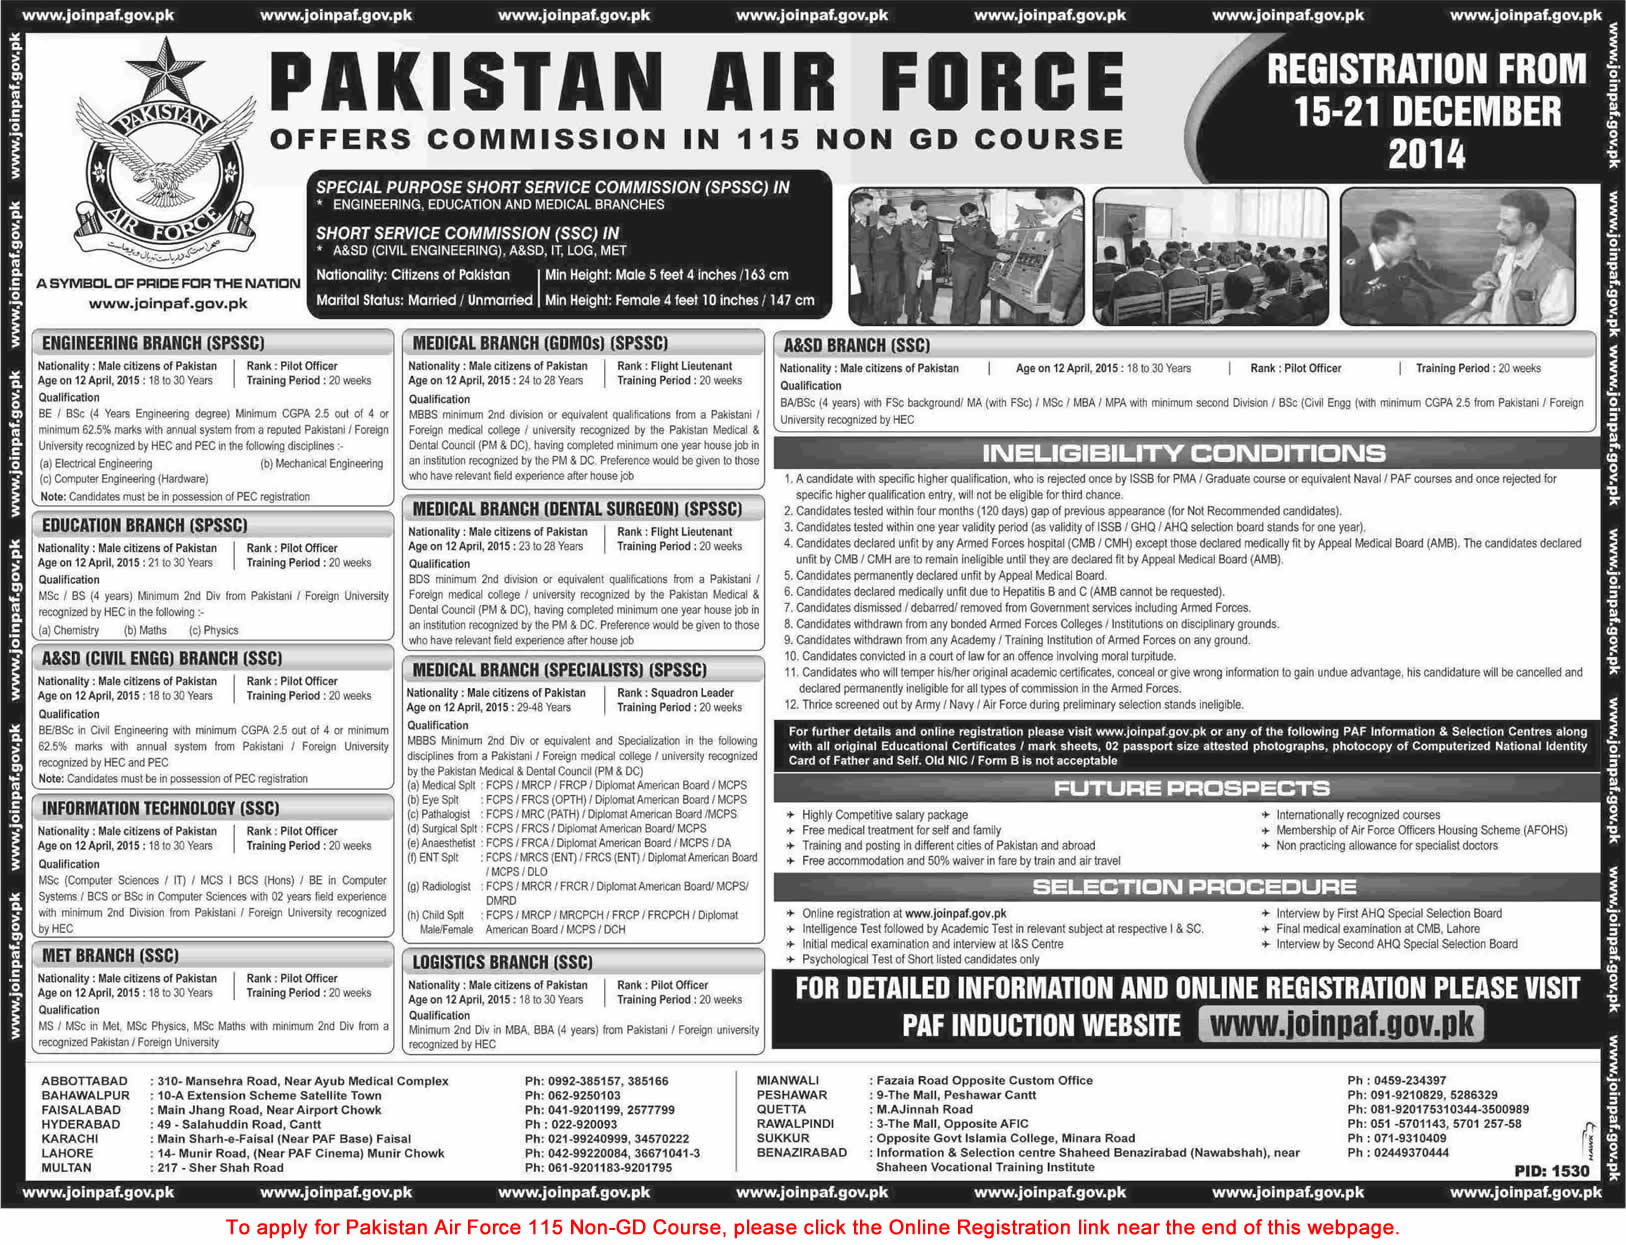 Join Pakistan Air Force 2014 December Online Registration Commission in 115 Non GD Course